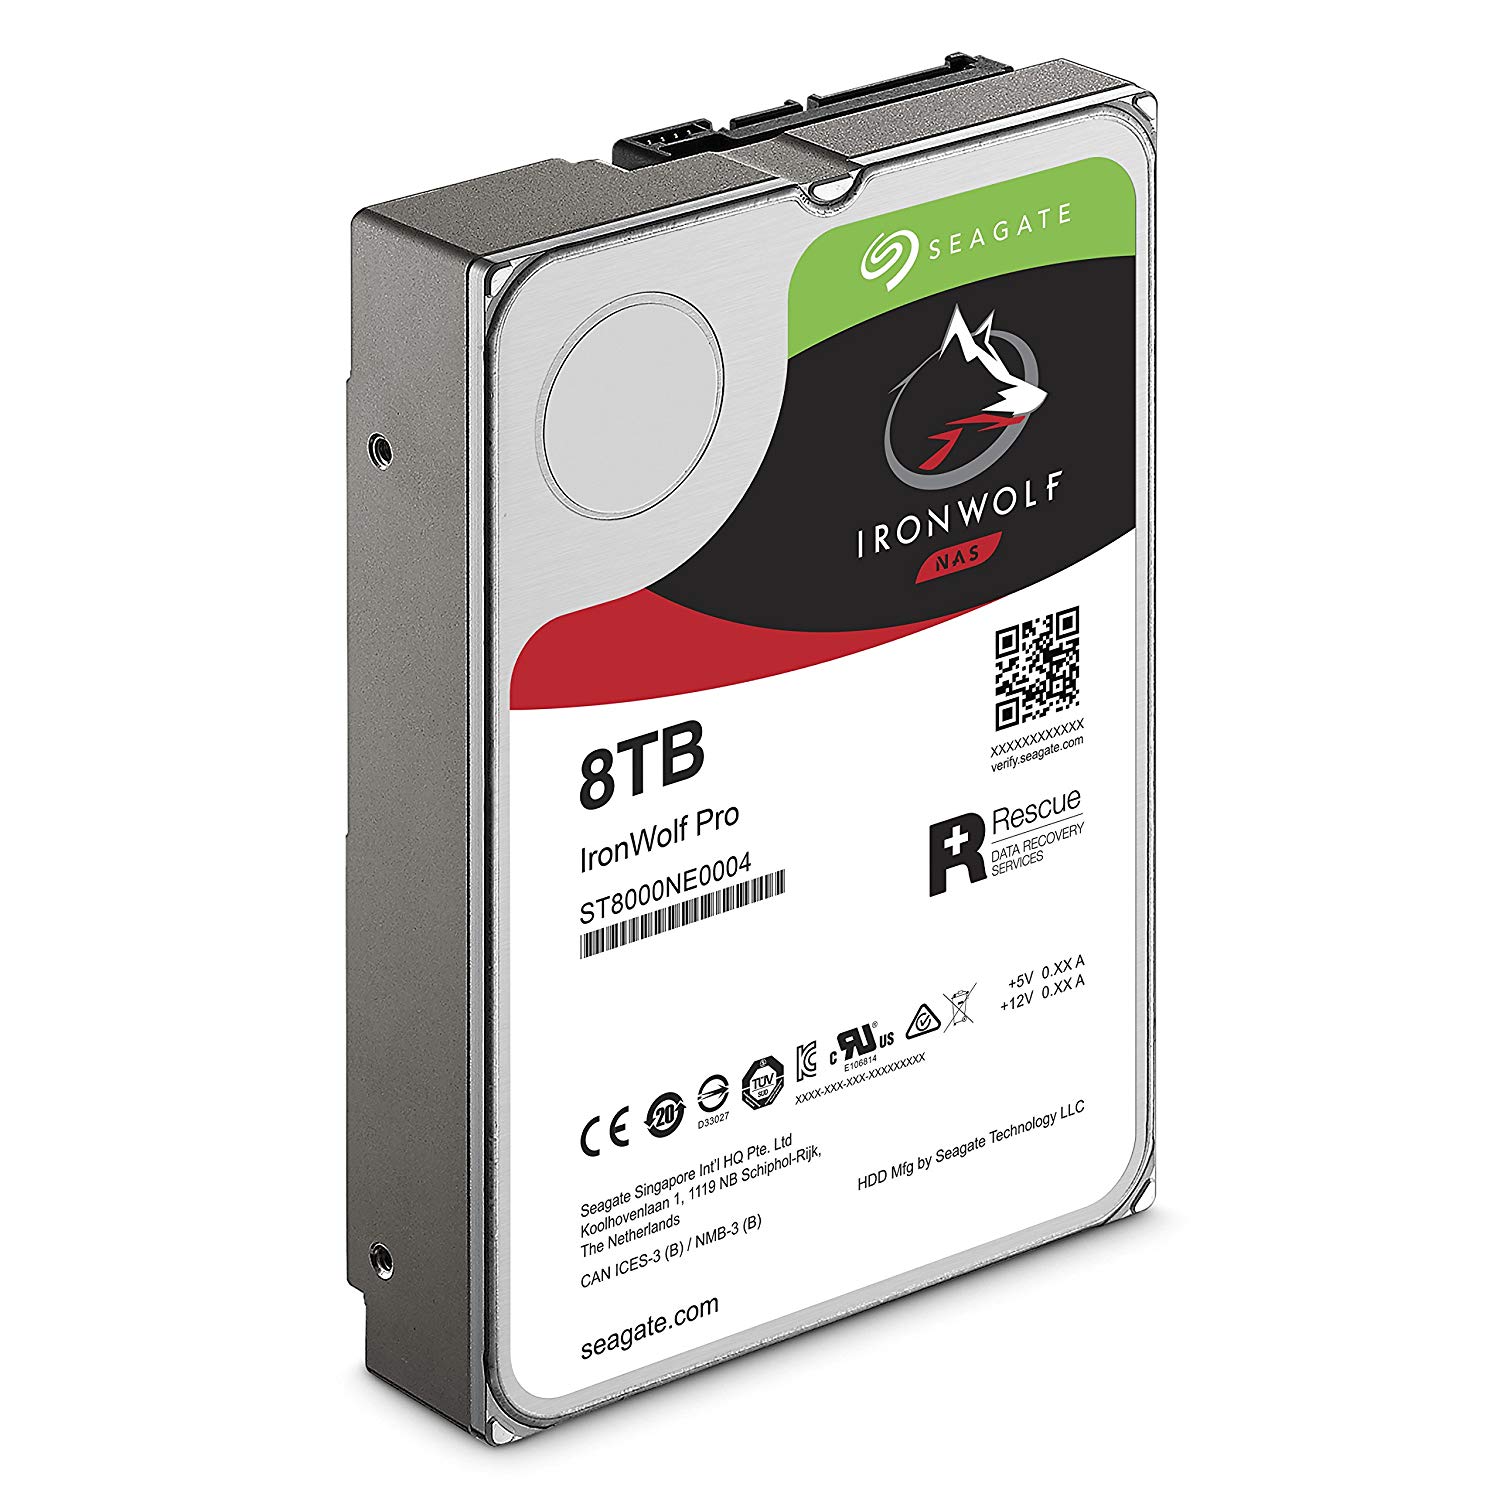 Ổ cứng HDD NAS Seagate Ironwolf 8TB 35 inch (ST8000VN0022)